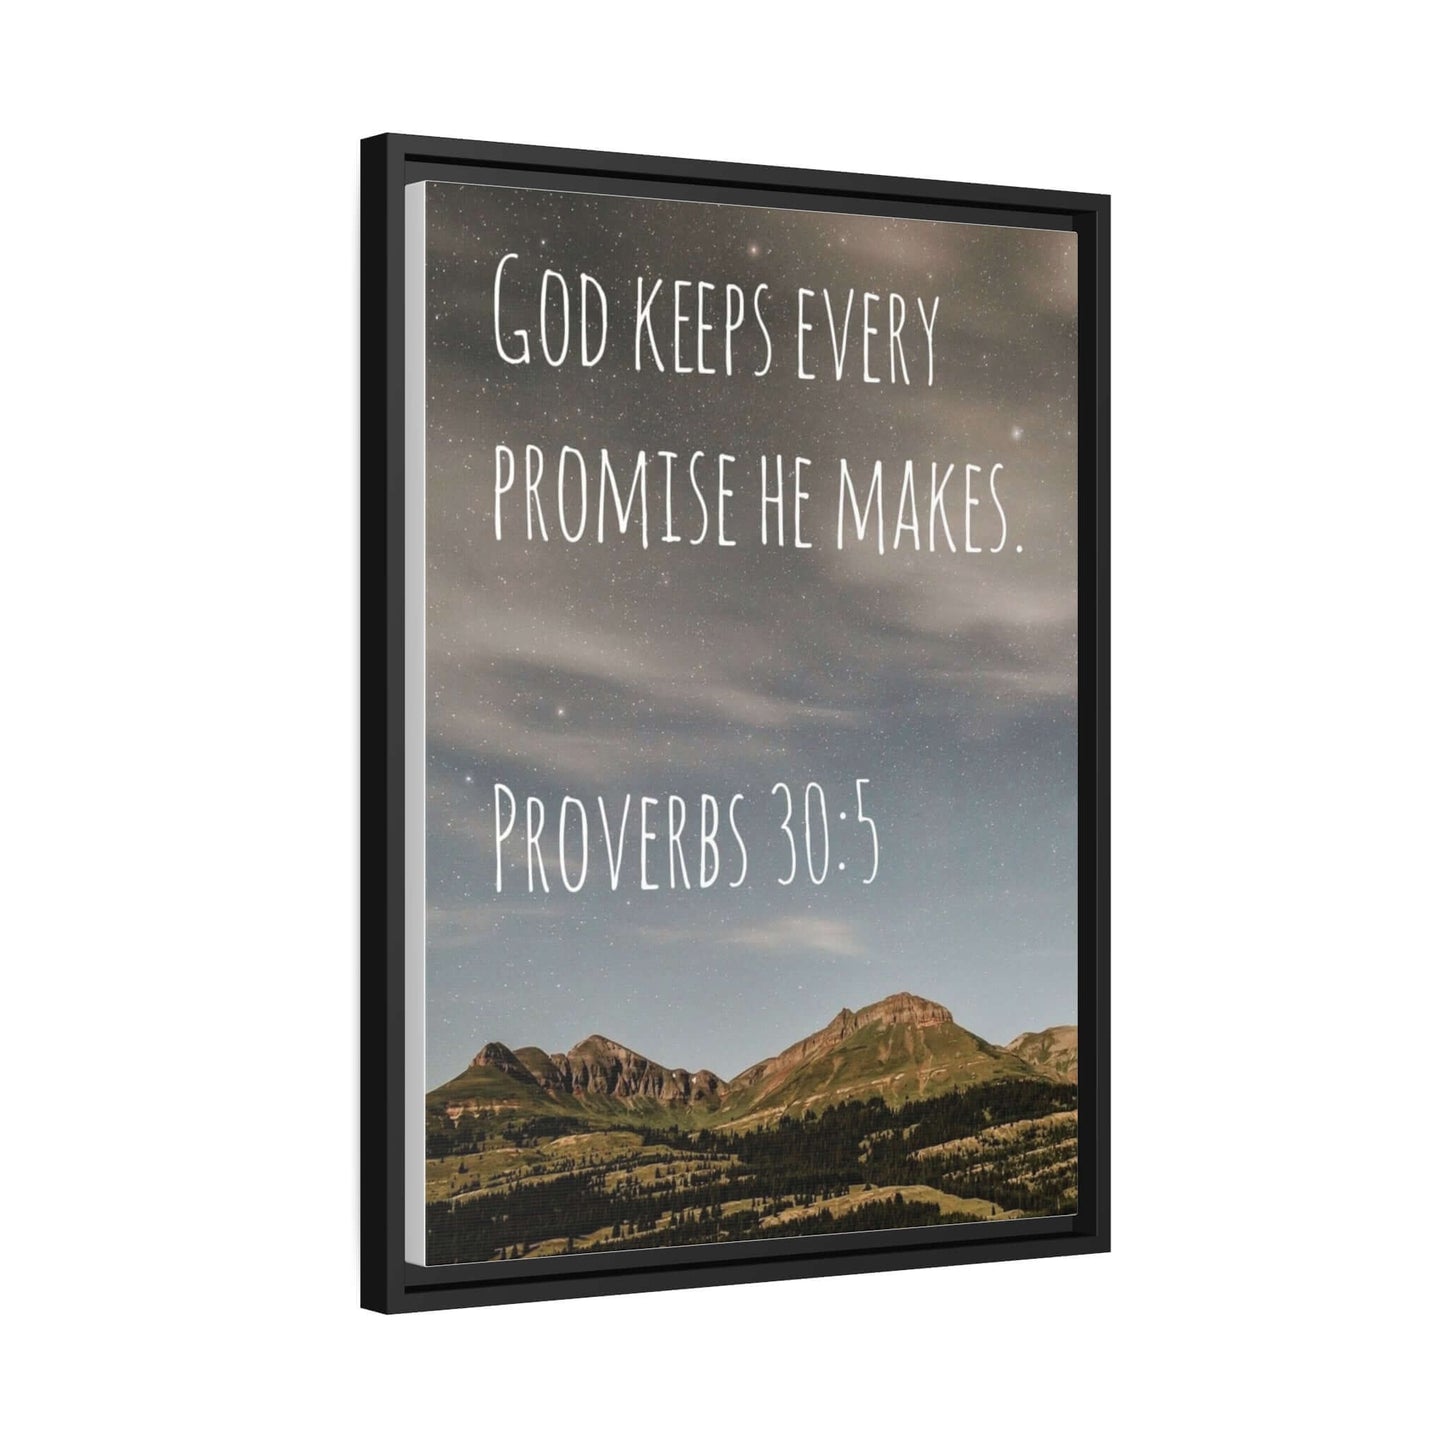 Canvas Print Framed with Black Pinewood – Eco-Friendly Art with Bible Verse | Art & Wall Decor,Canvas,Decor,Eco-friendly,Framed,Hanging Hardware,Home & Living,Summer Picks,Sustainable